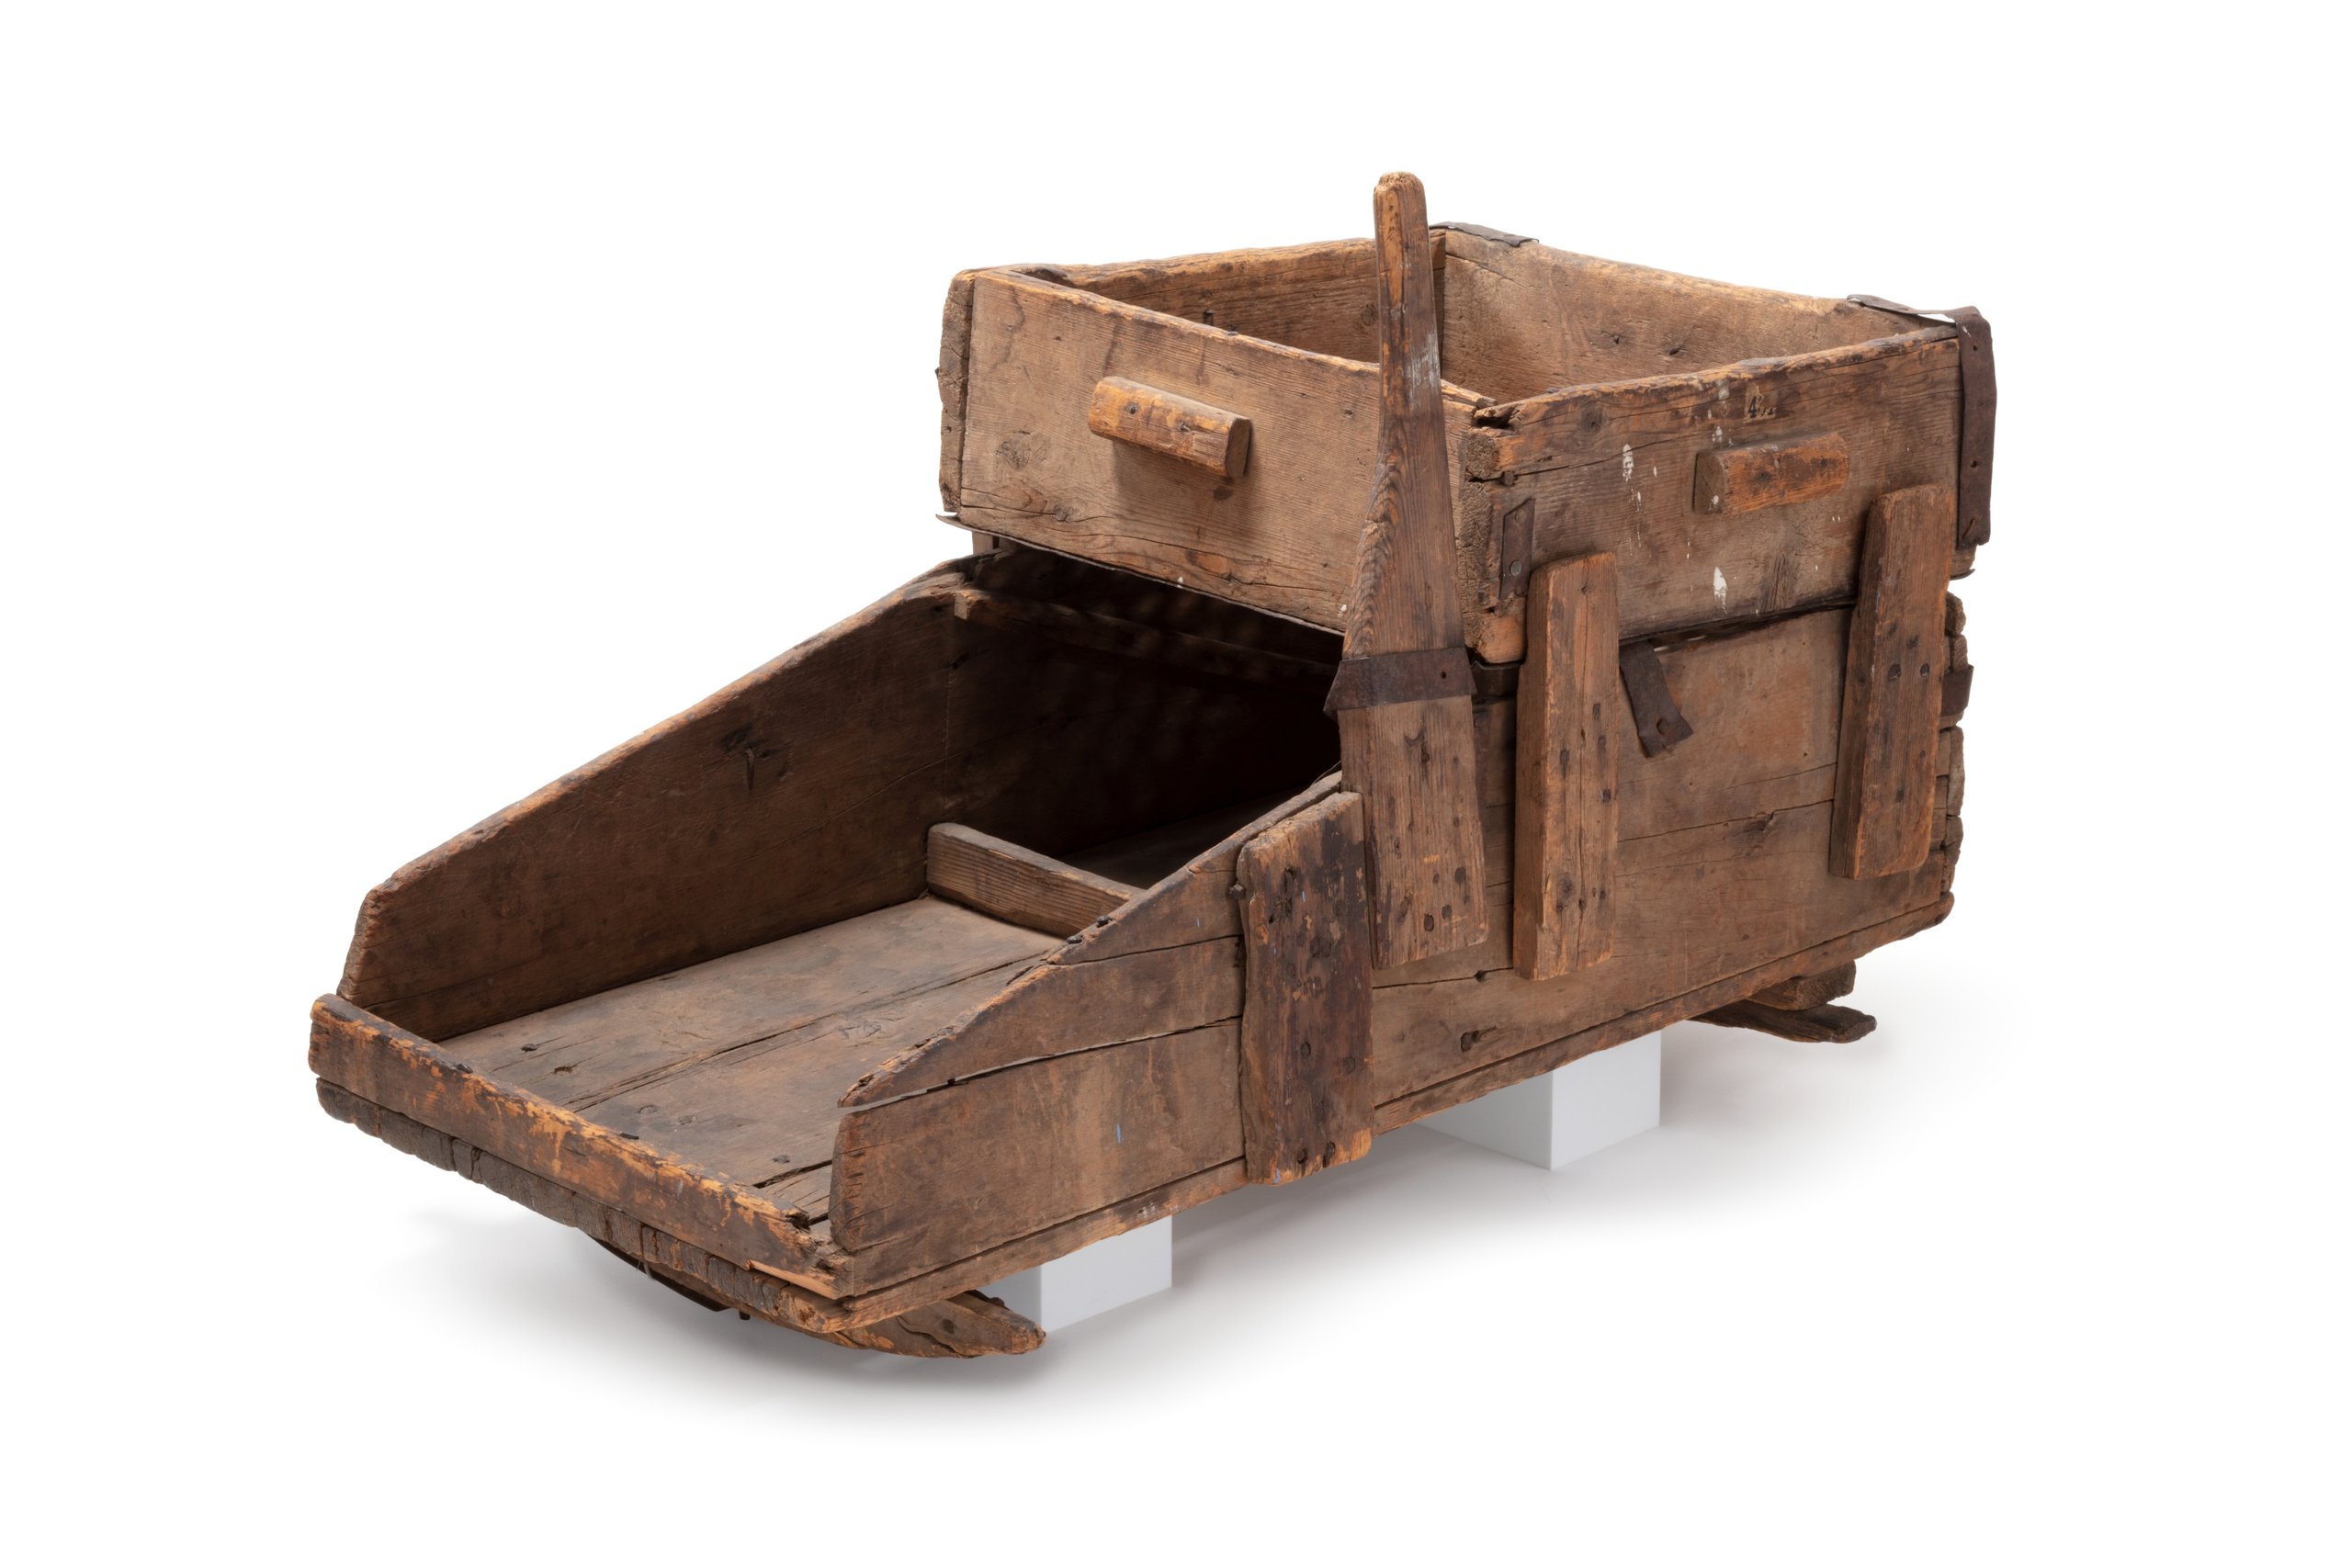 Gold washing cradle used in the Ophir goldfields